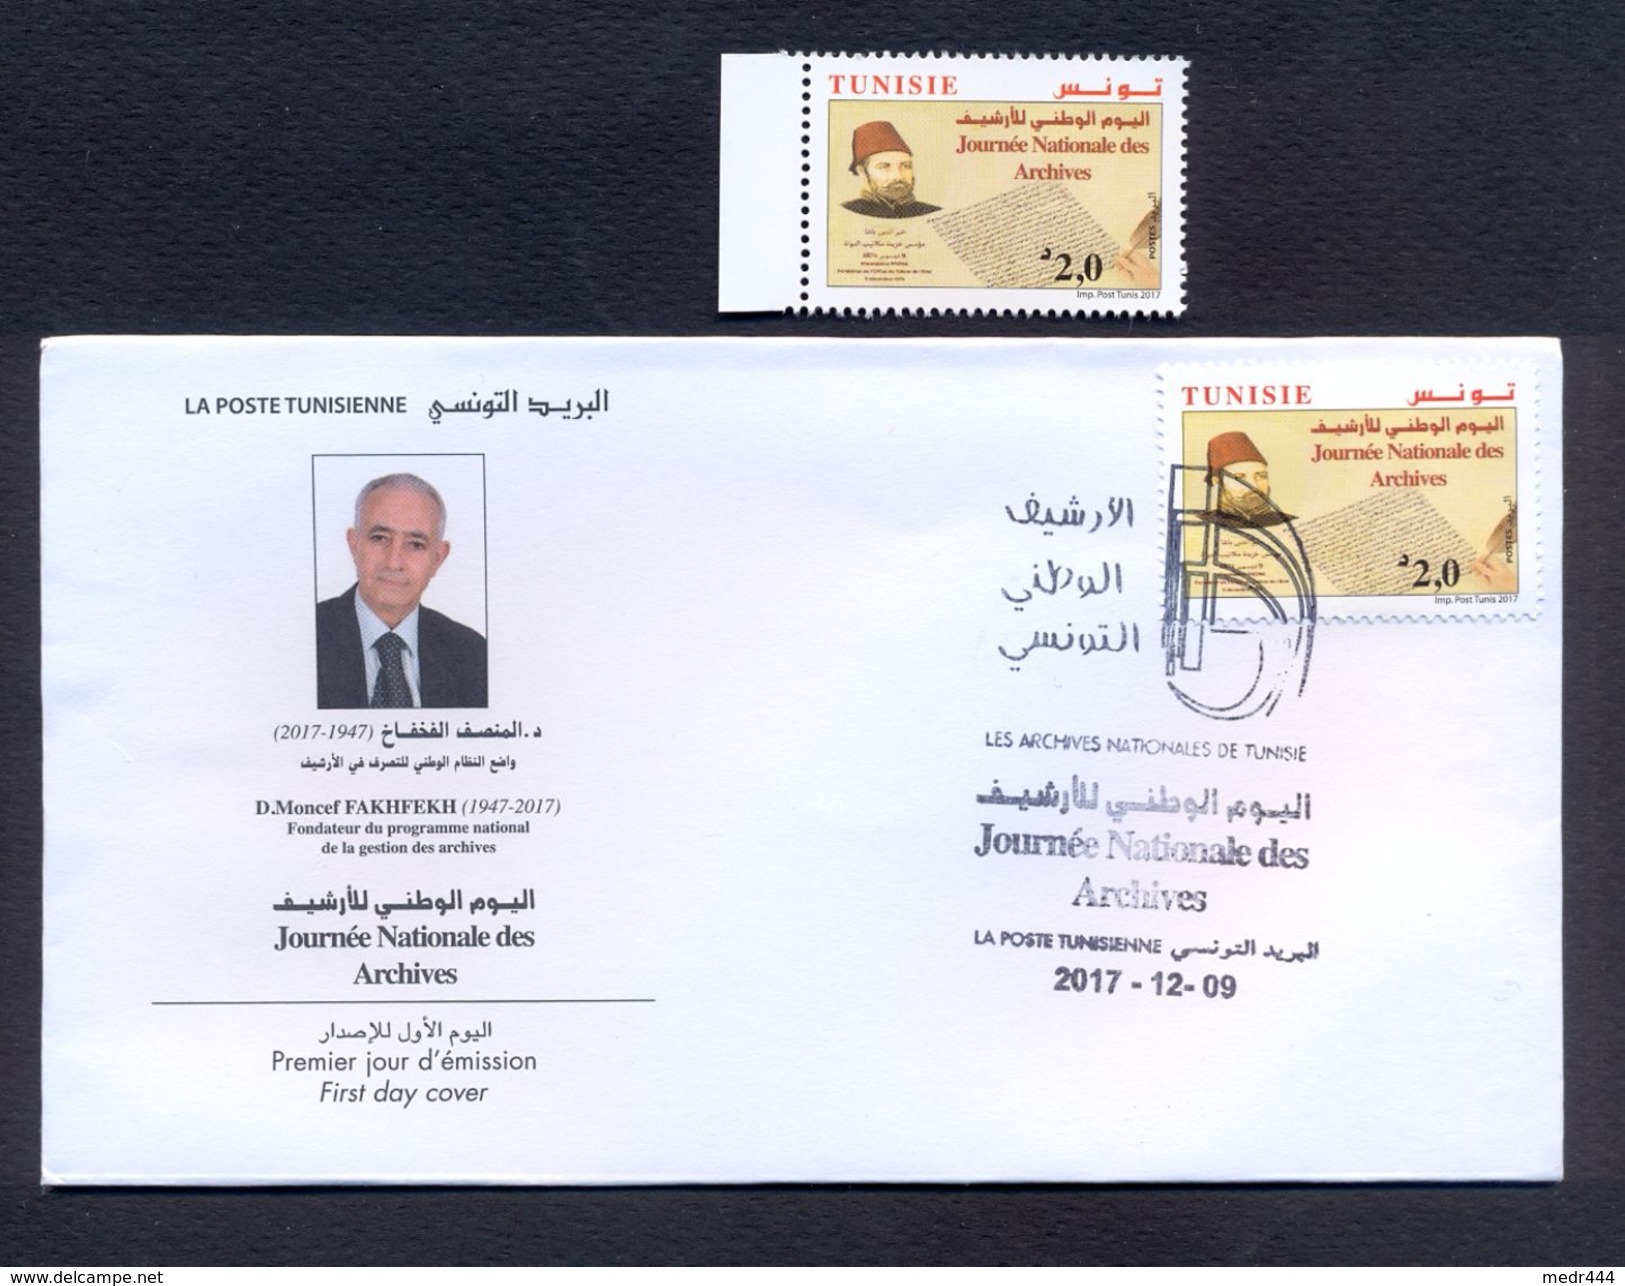 Tunisia/Tunisie 2017 - Stamp + FDC - The National Archives Day - MNH** Excellent Quality - Tunisia